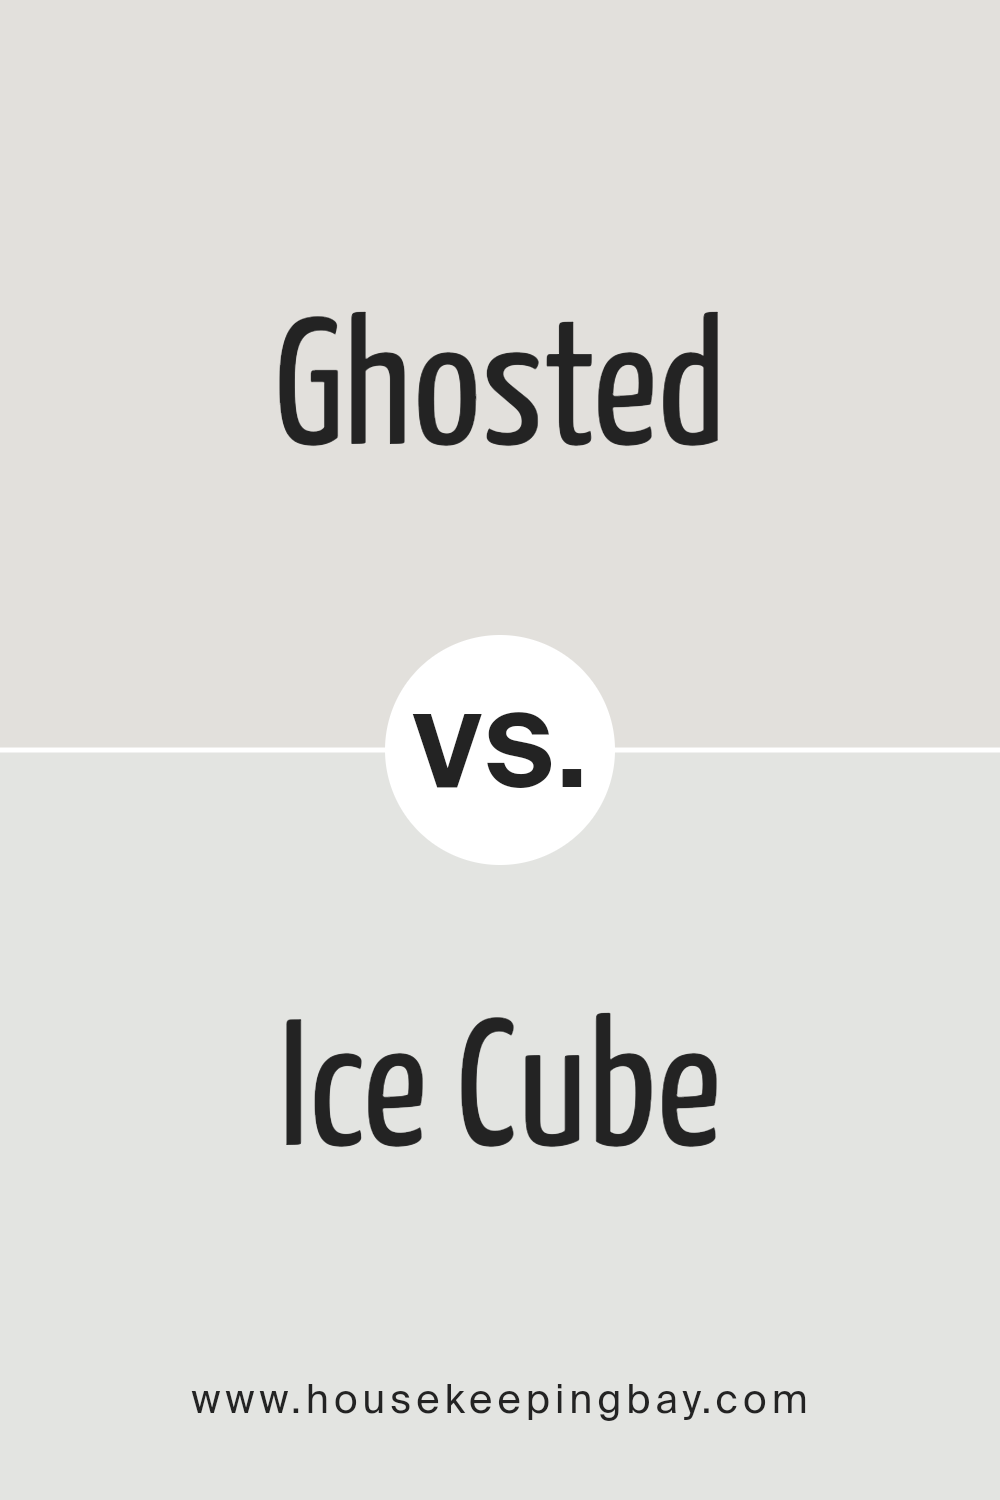 ghosted_sw_9545_vs_ice_cube_sw_6252